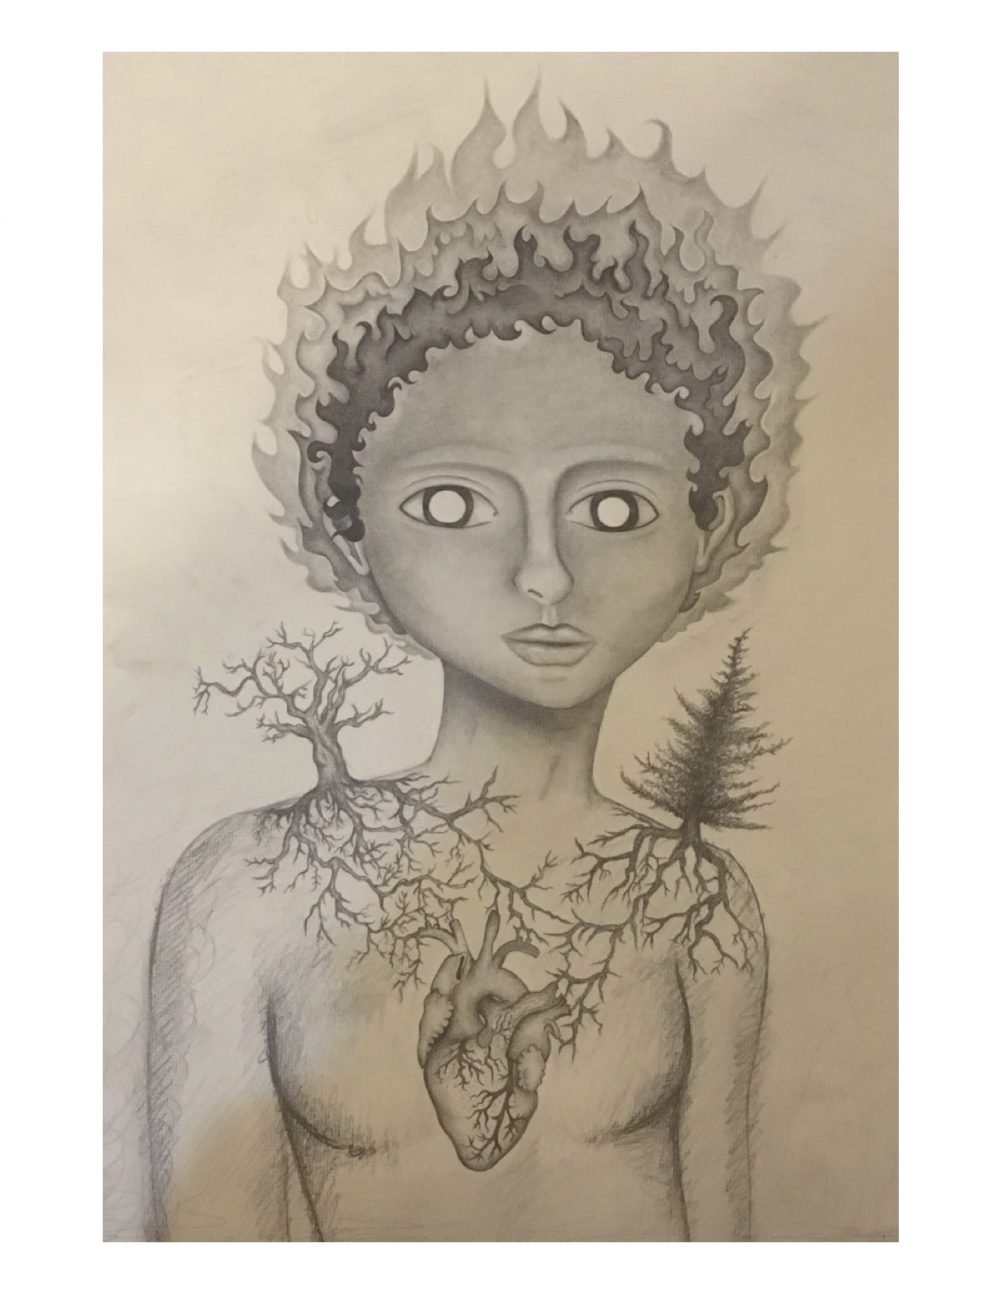 Wren Ingber, Rooted, 2020, graphite pencils, 24" x 15"